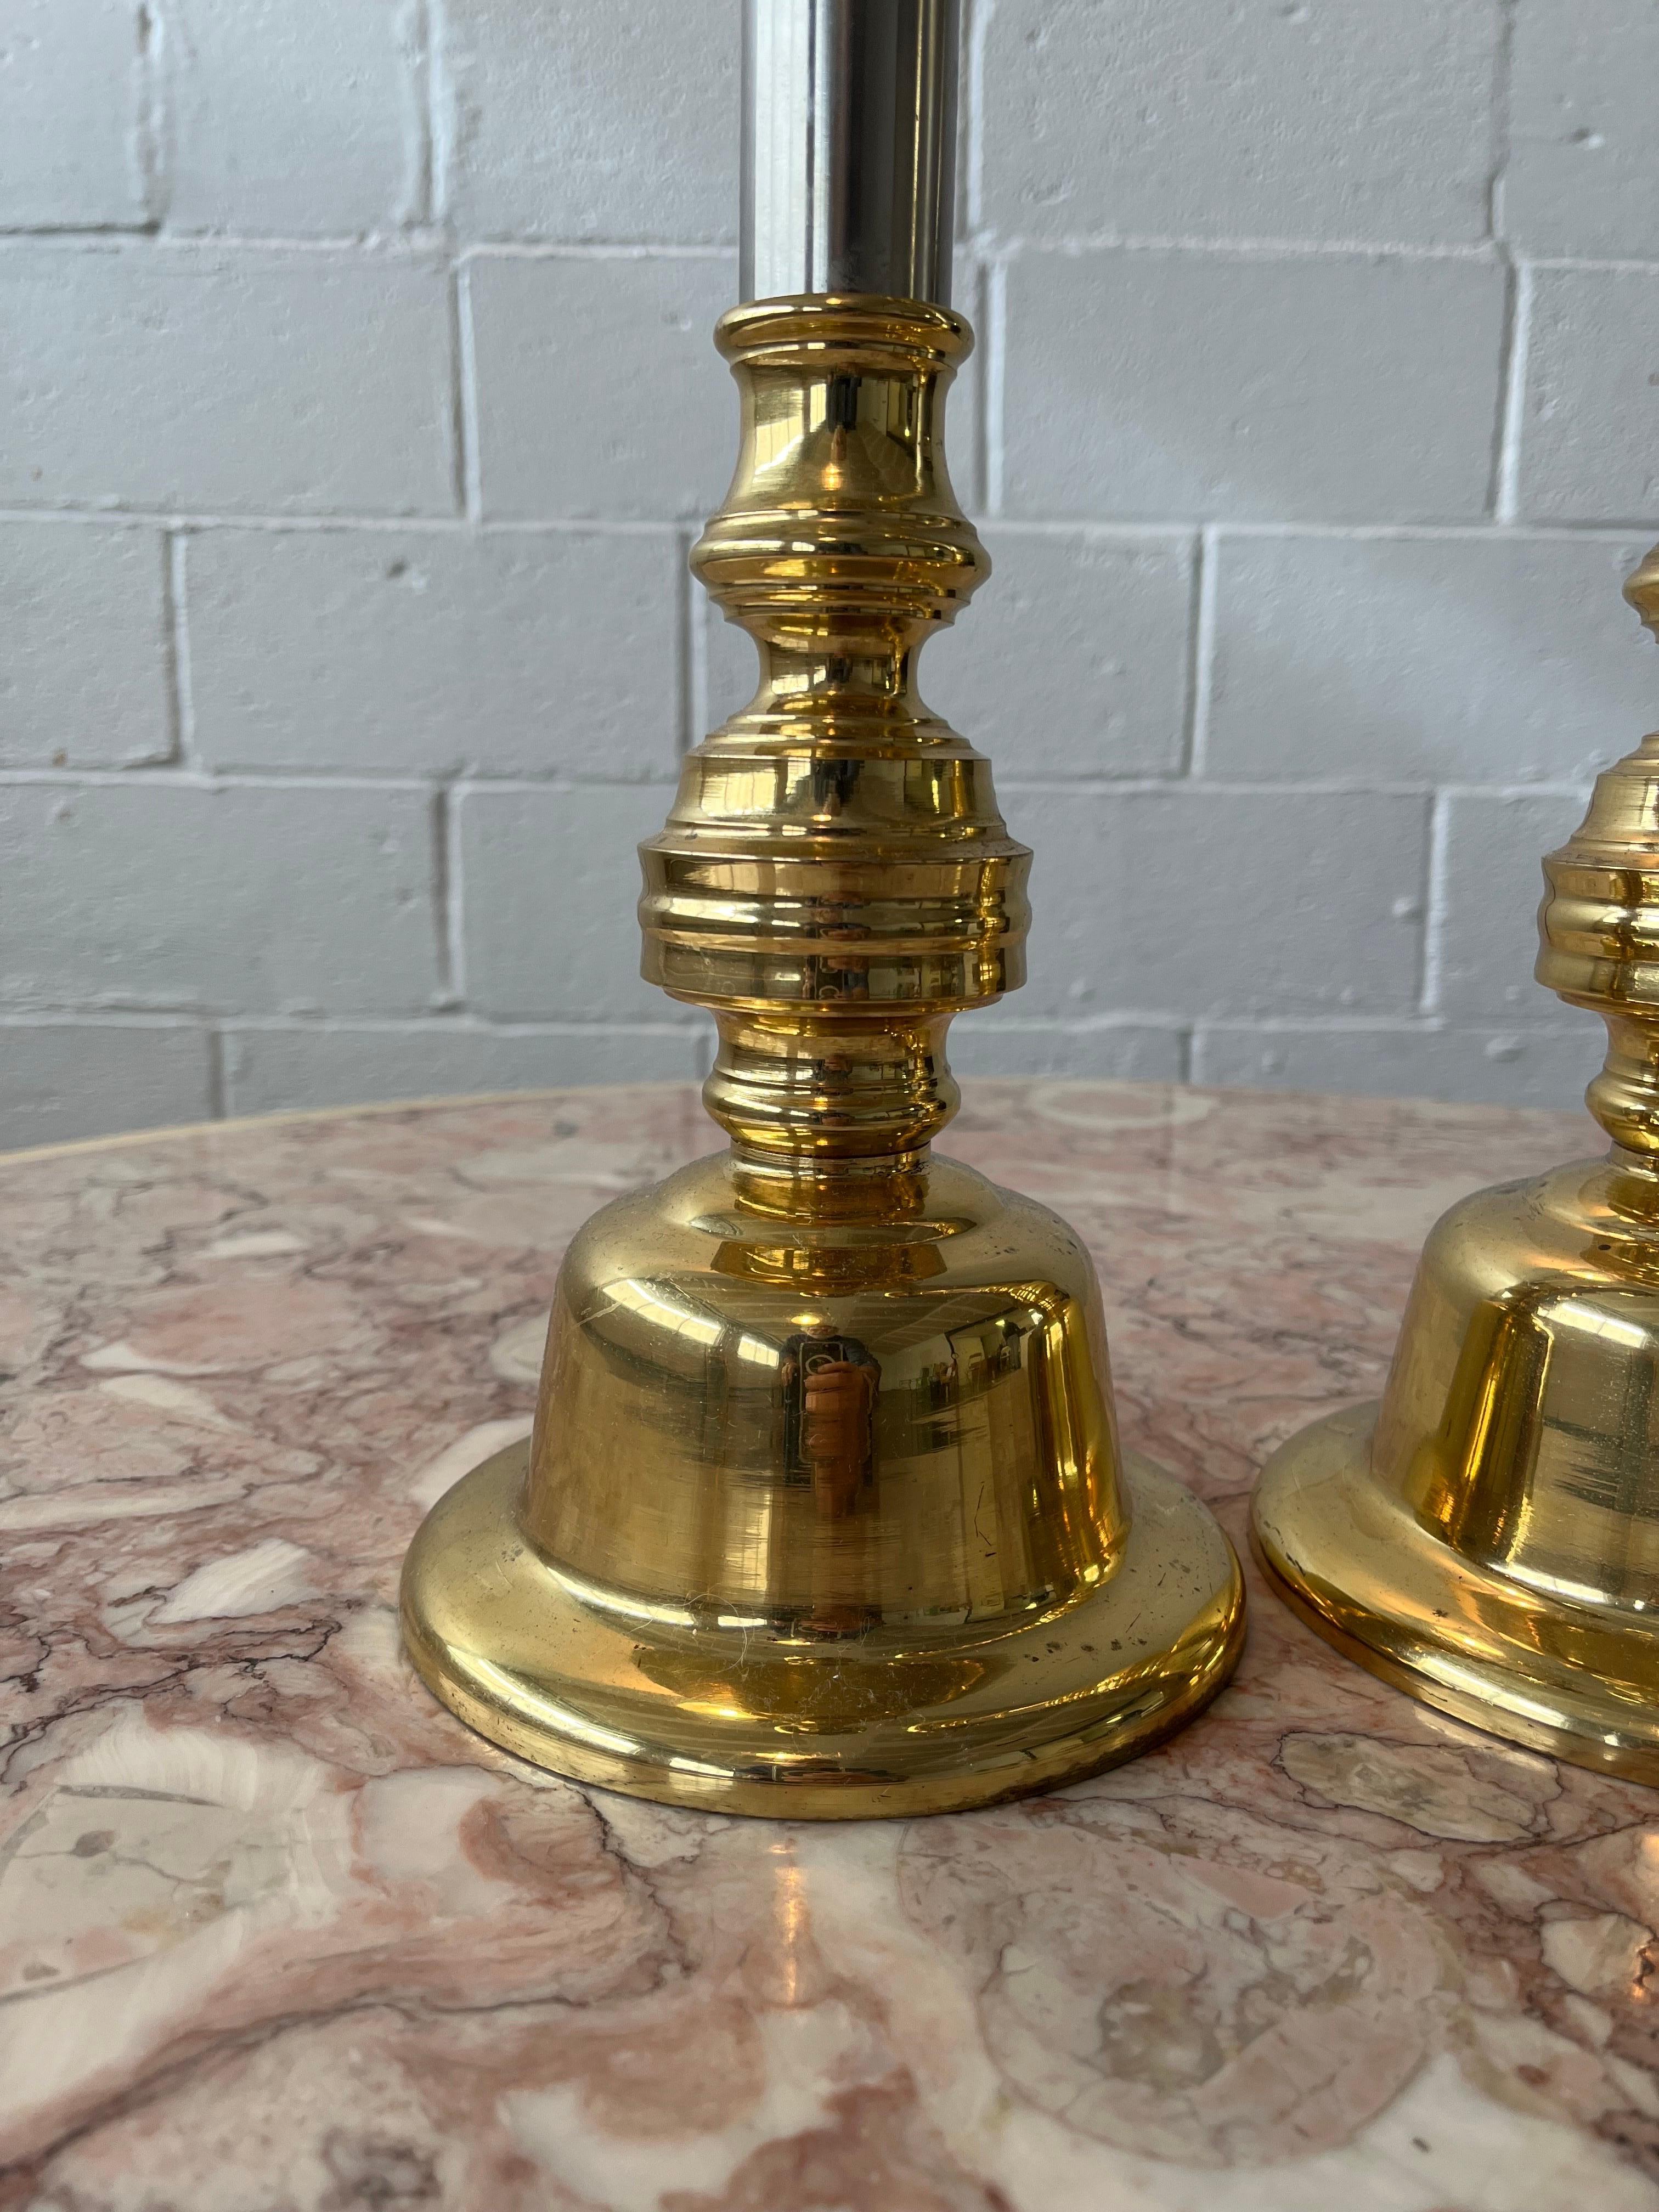 1970's Candle Holders Neoclassical Brass and Chrome Candle Sticks - a Pair For Sale 1